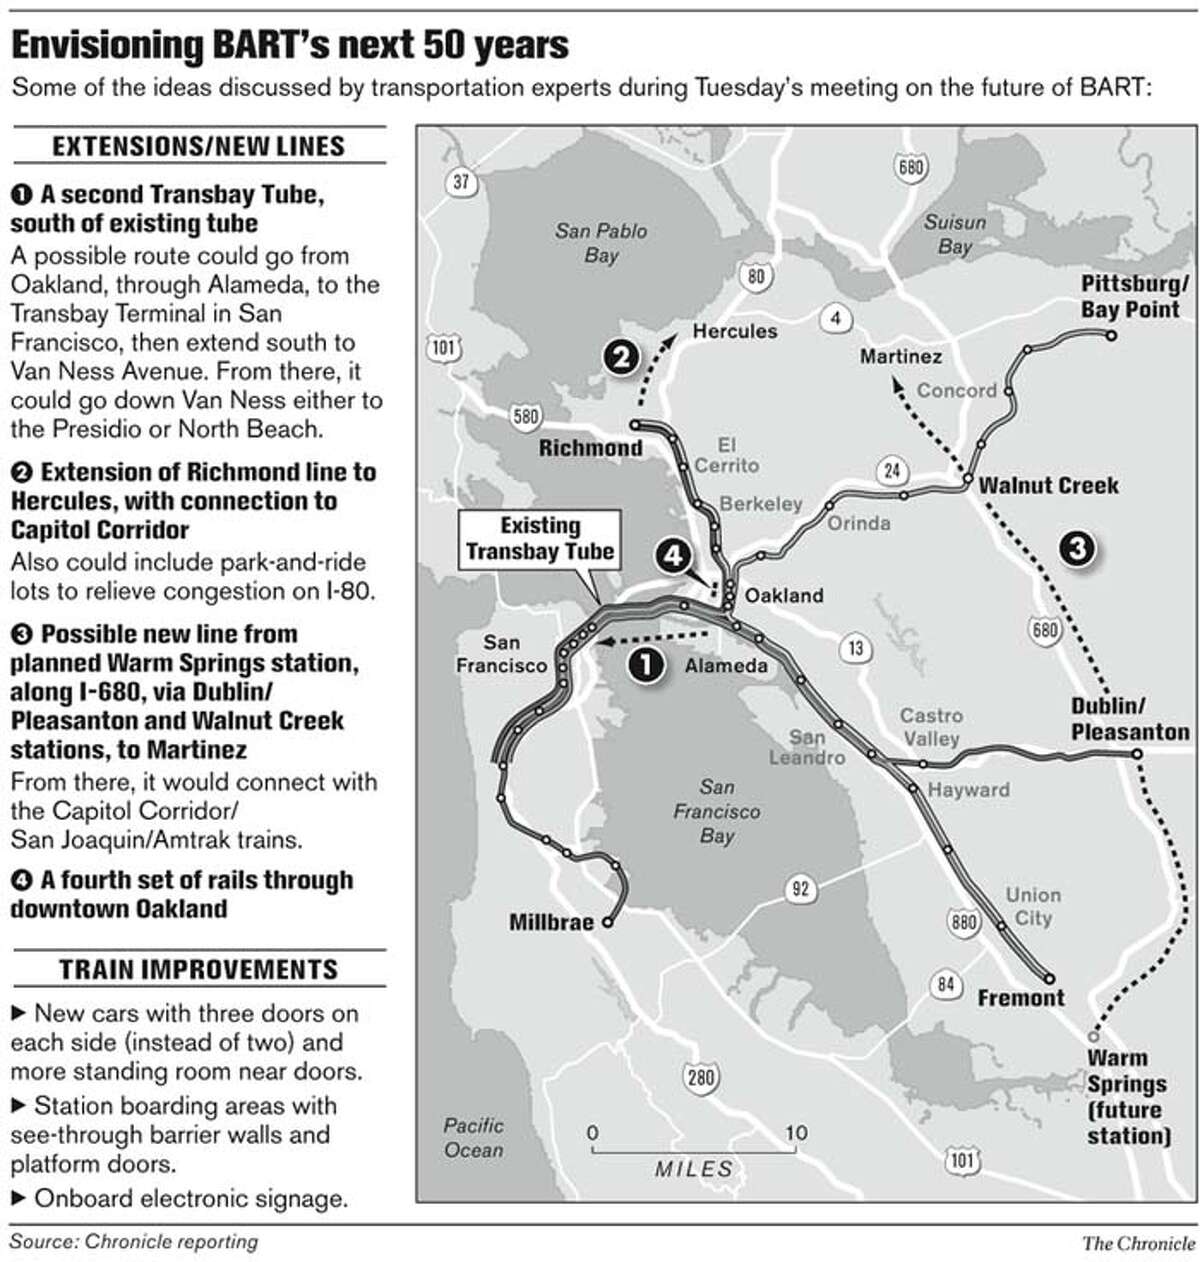 Envisioning BART's next 50 years. Chronicle Graphic